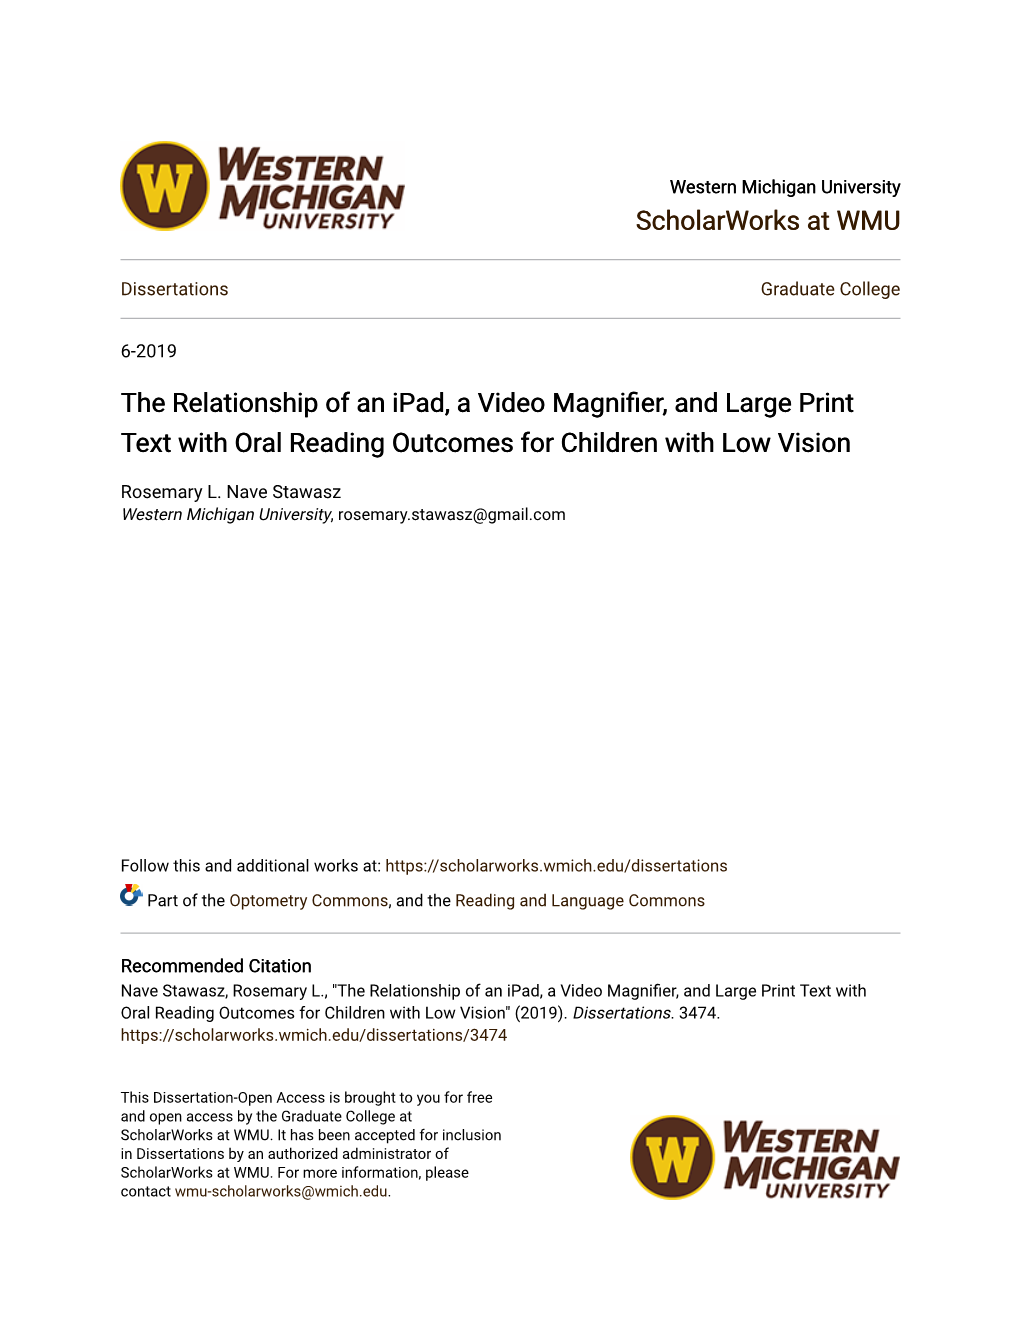 The Relationship of an Ipad, a Video Magnifier, and Large Print Text with Oral Reading Outcomes for Children with Low Vision